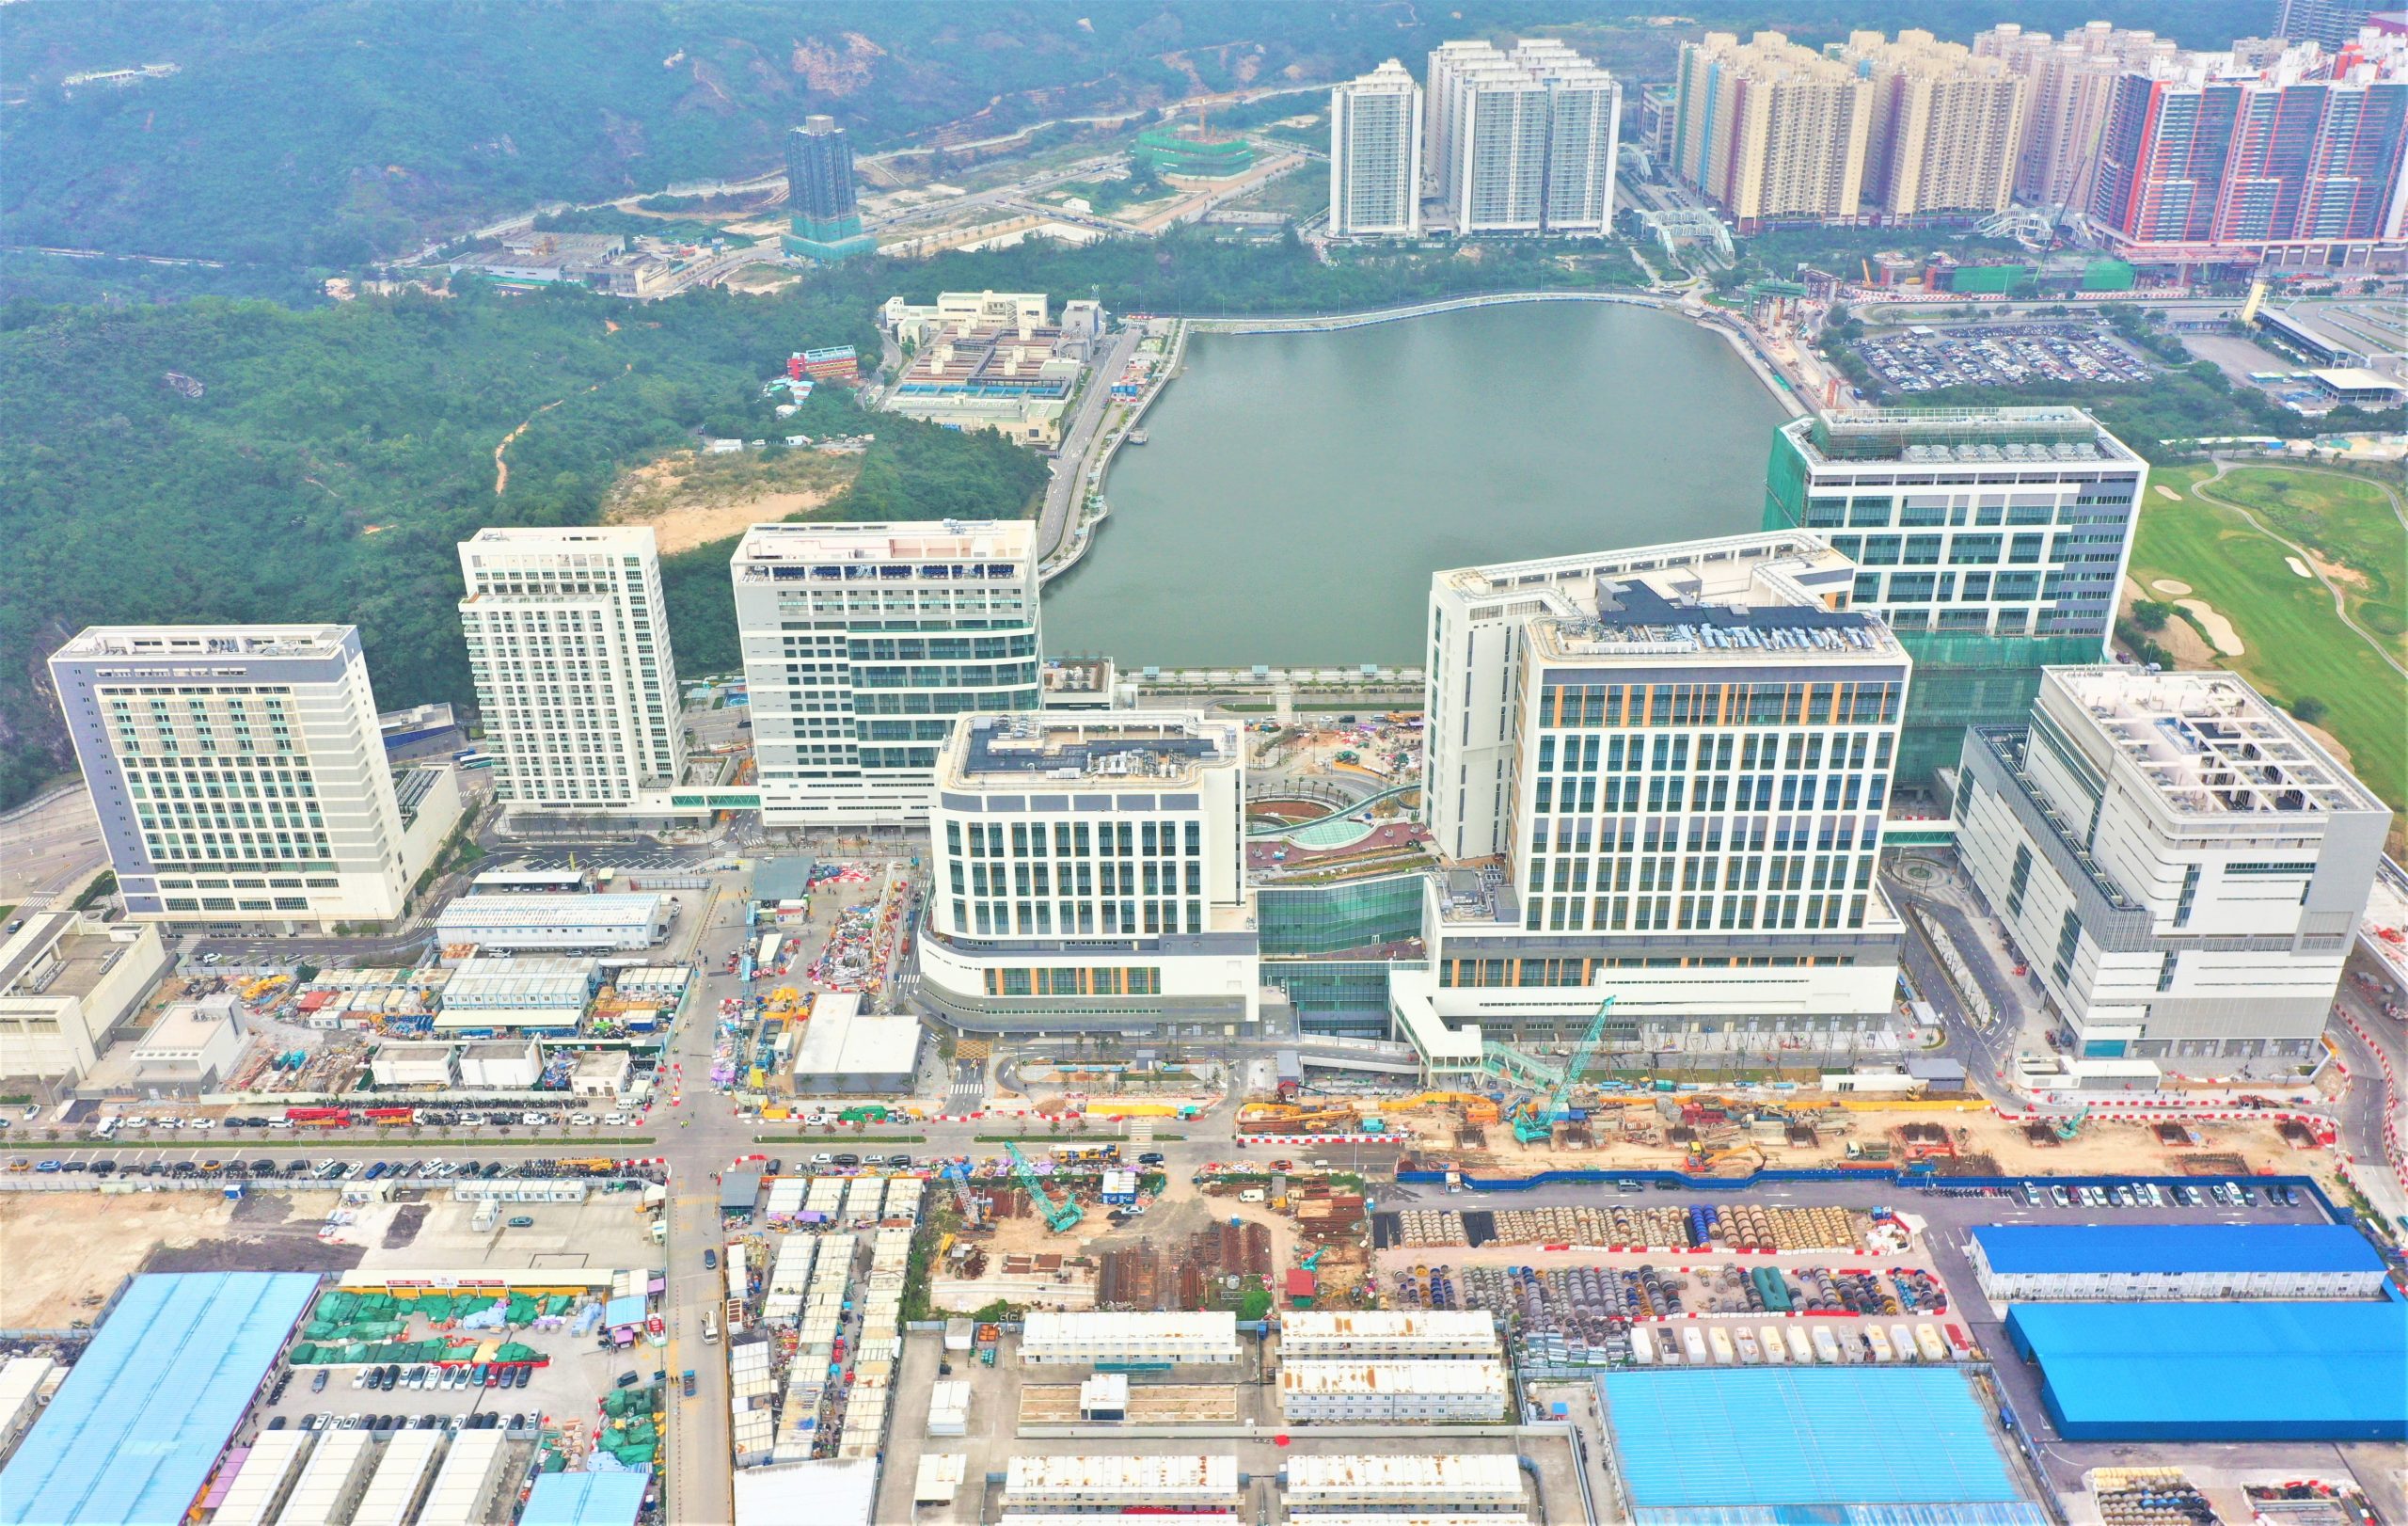 Construction of a large hospital complex in Cotai is mostly finished